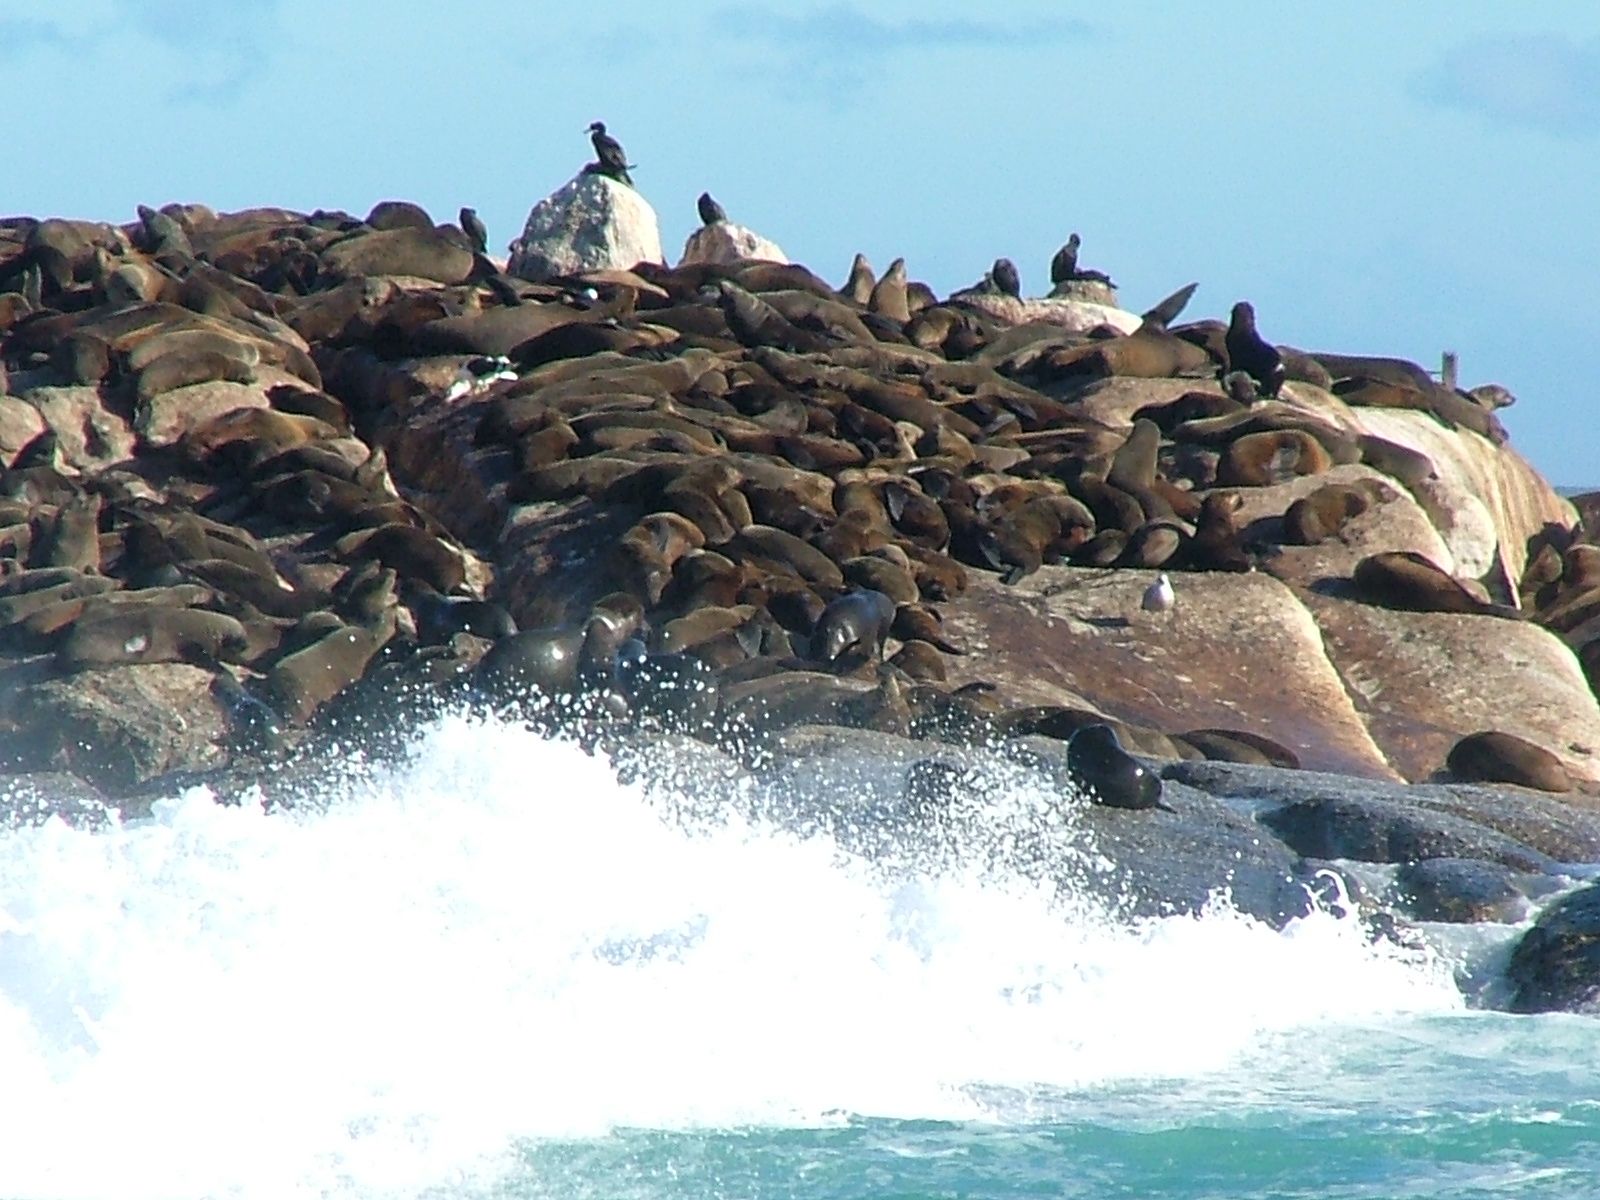 Sea lions in africa